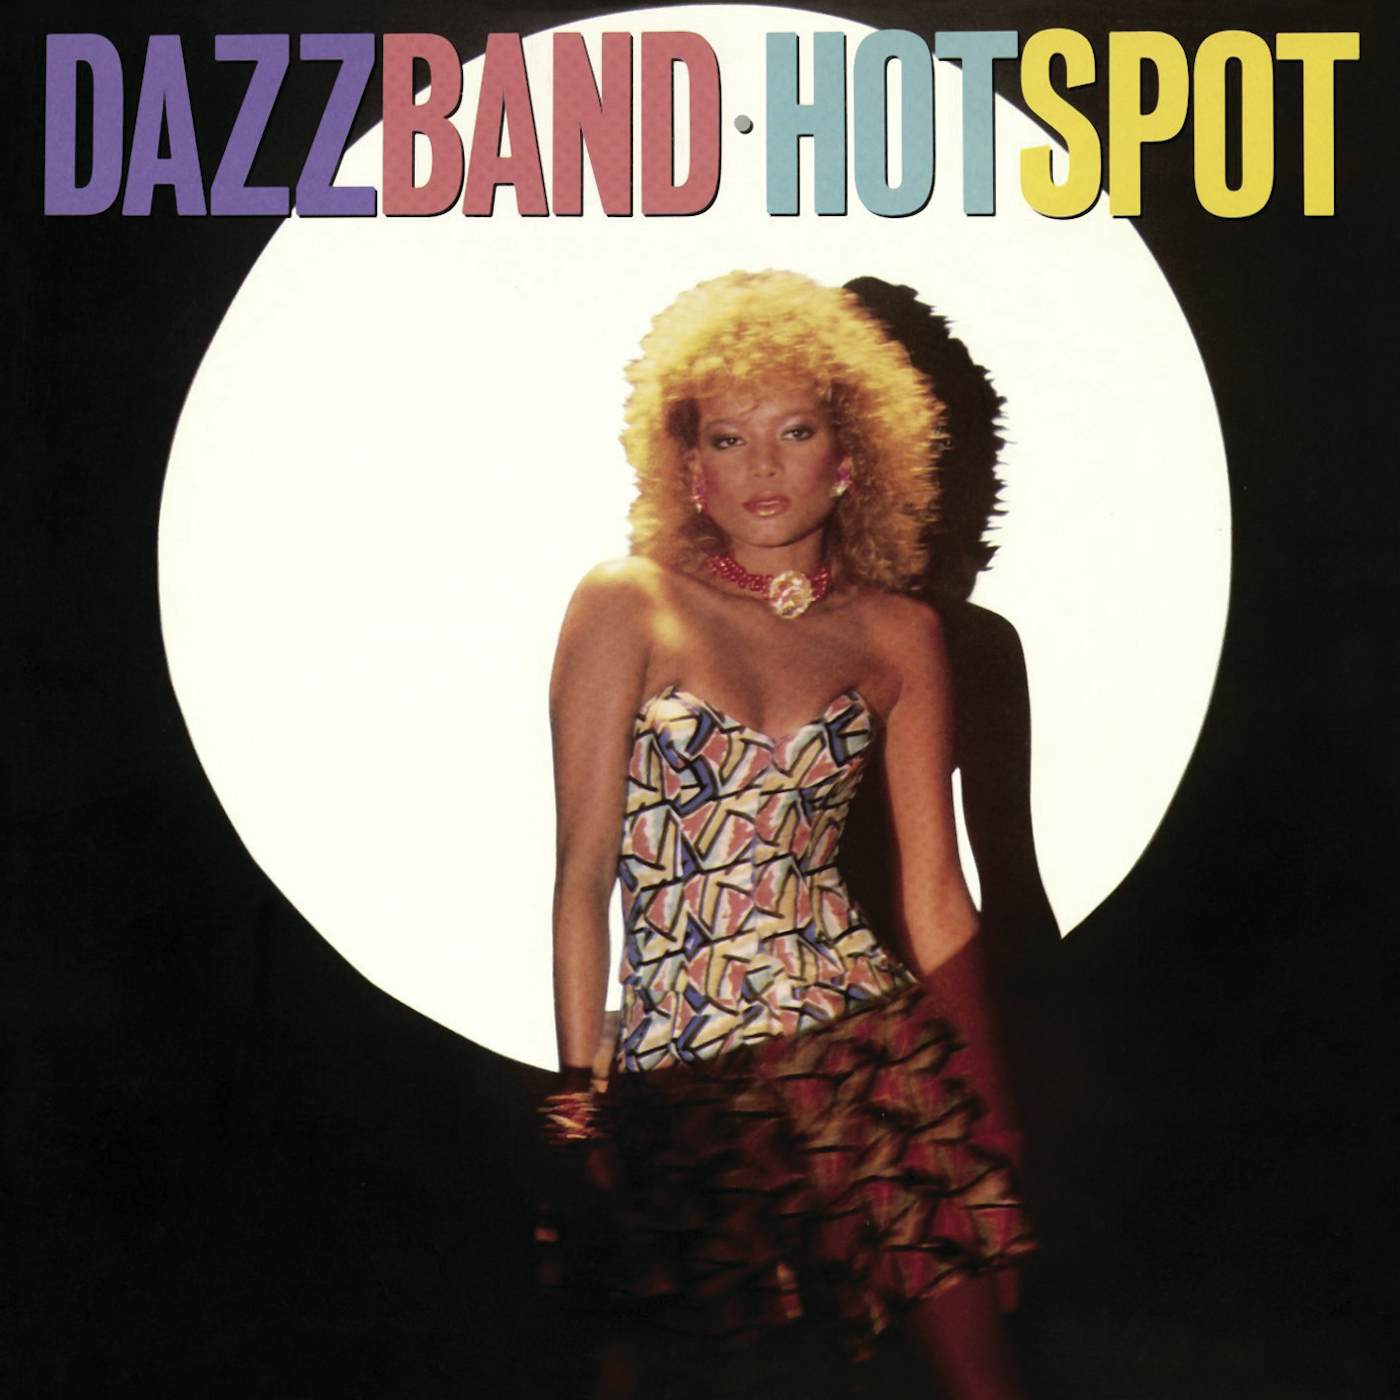 Dazz Band CD - Live & Funky